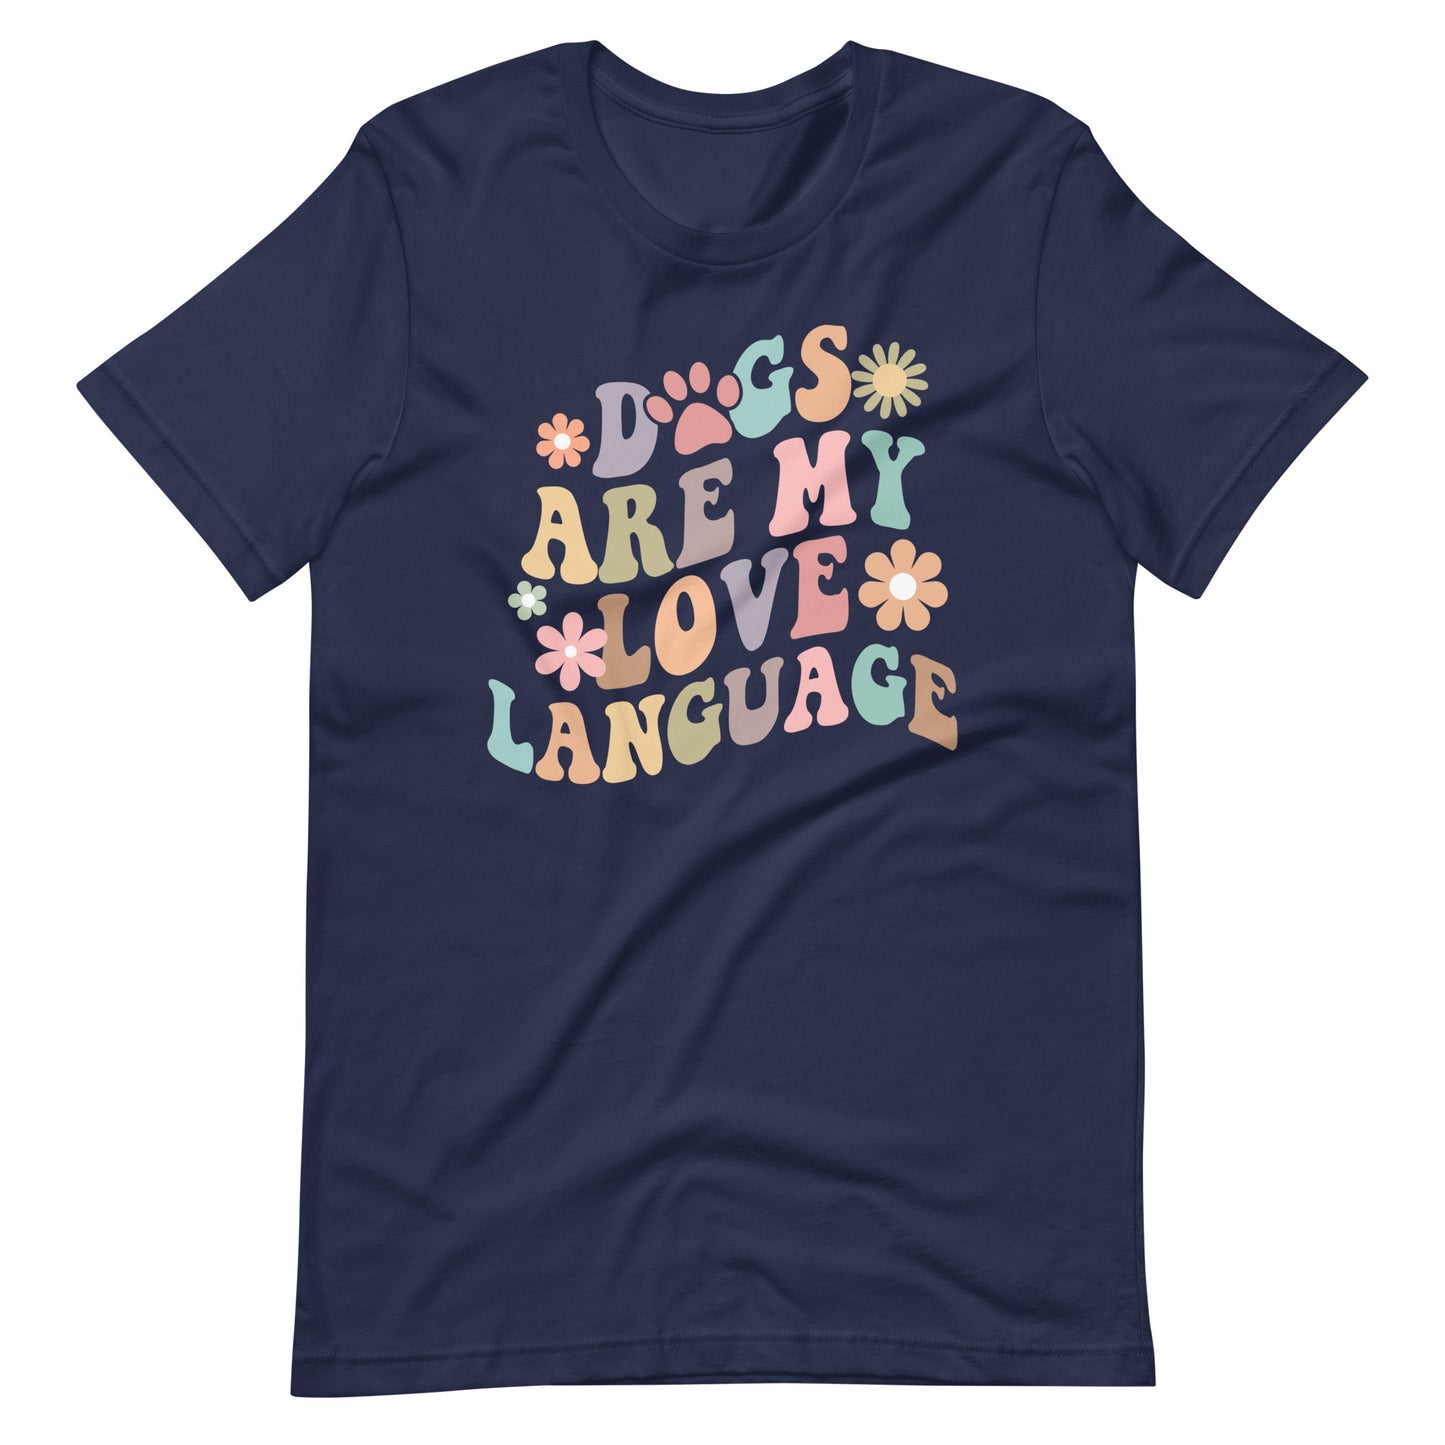 Dogs are My Love Language T-Shirt